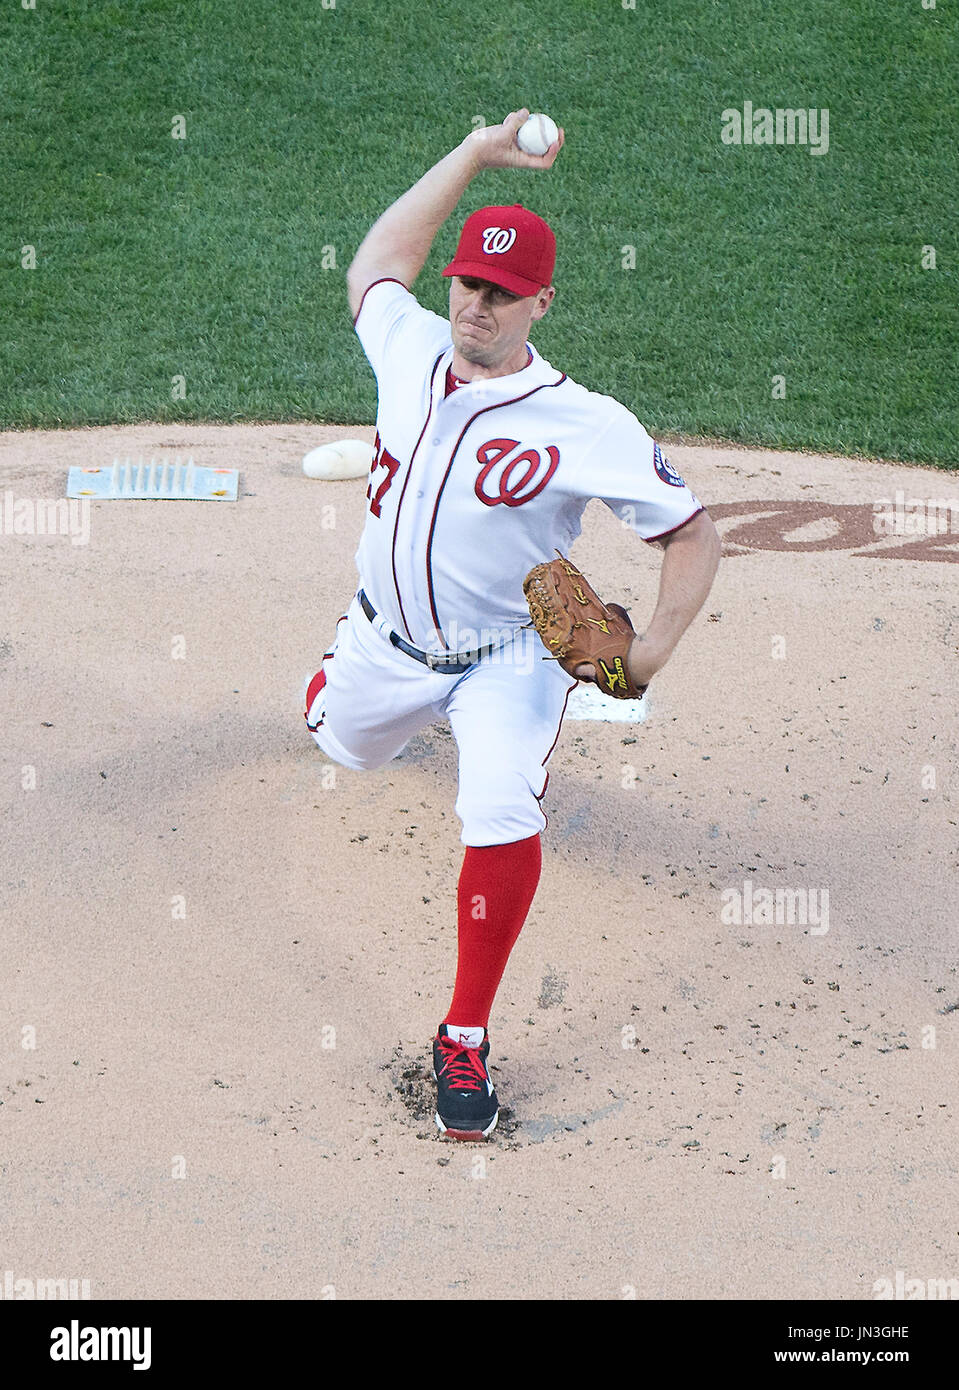 Washington Nationals starting pitcher Jordan Zimmermann (27) pitches in the first inning against the Miami Marlins at Nationals Park in Washington, D.C. on Wednesday, April 9, 2014.  Zimmermann was removed from the game after allowing five runs on seven hits in 1 2/3 innings.  Credit: Ron Sachs / CNP Stock Photo